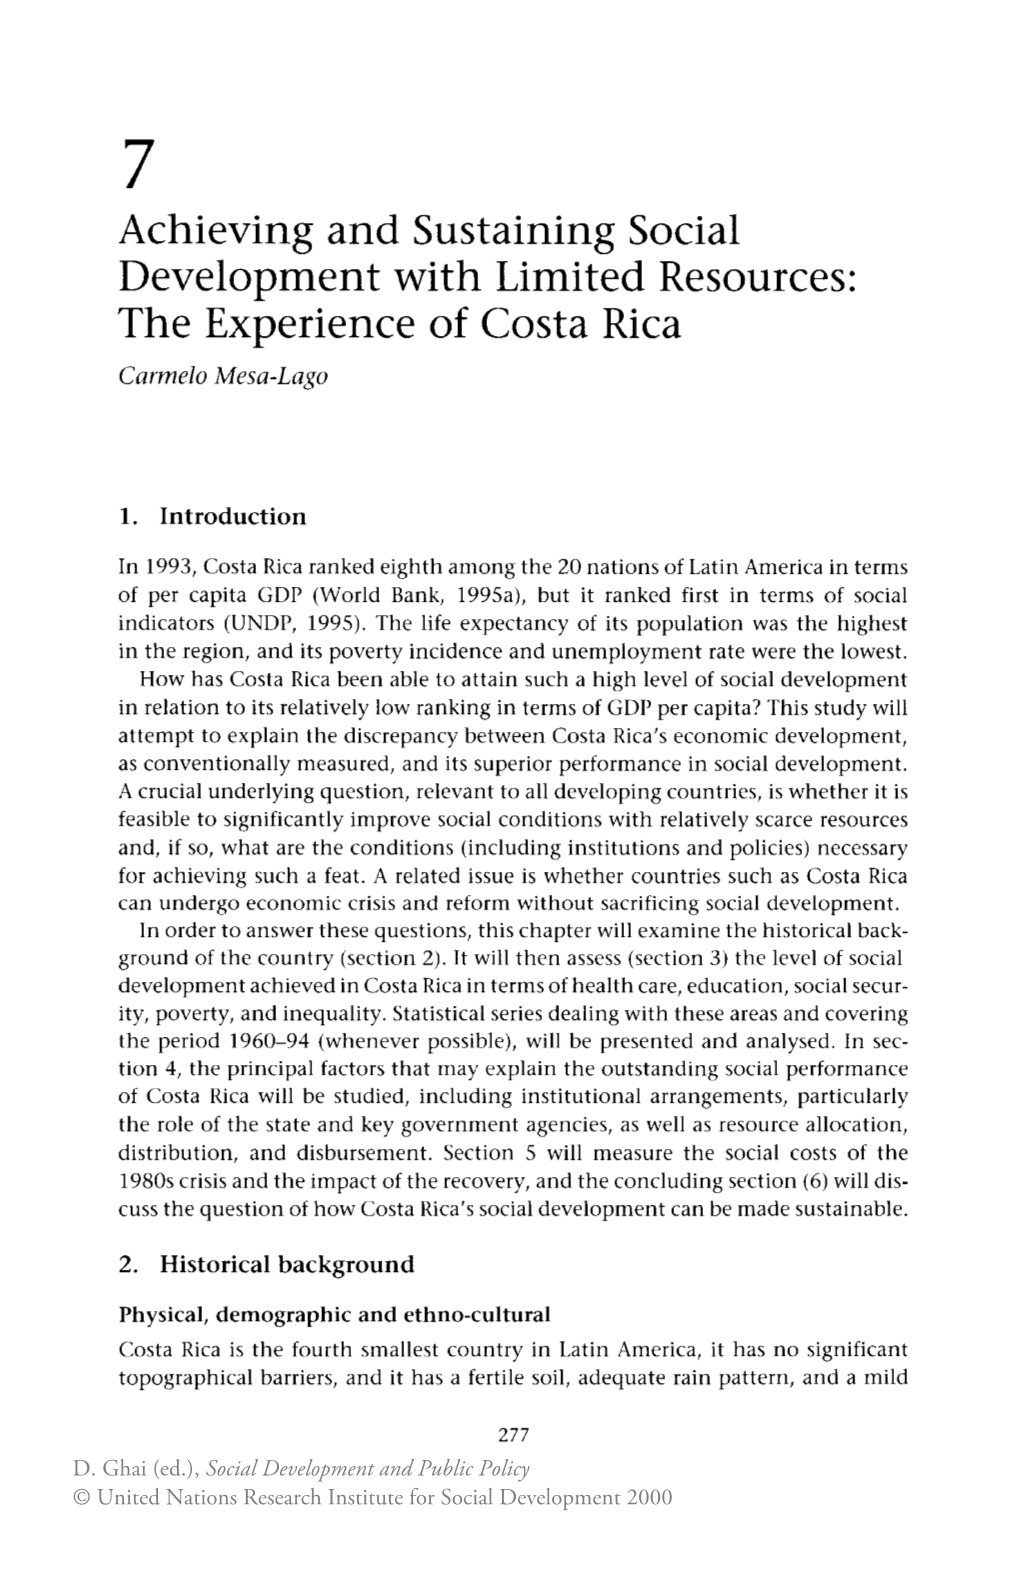 Achieving and Sustaining Social Development with Limited Resources: the Experience of Costa Rica Carmela Mesa-Laga